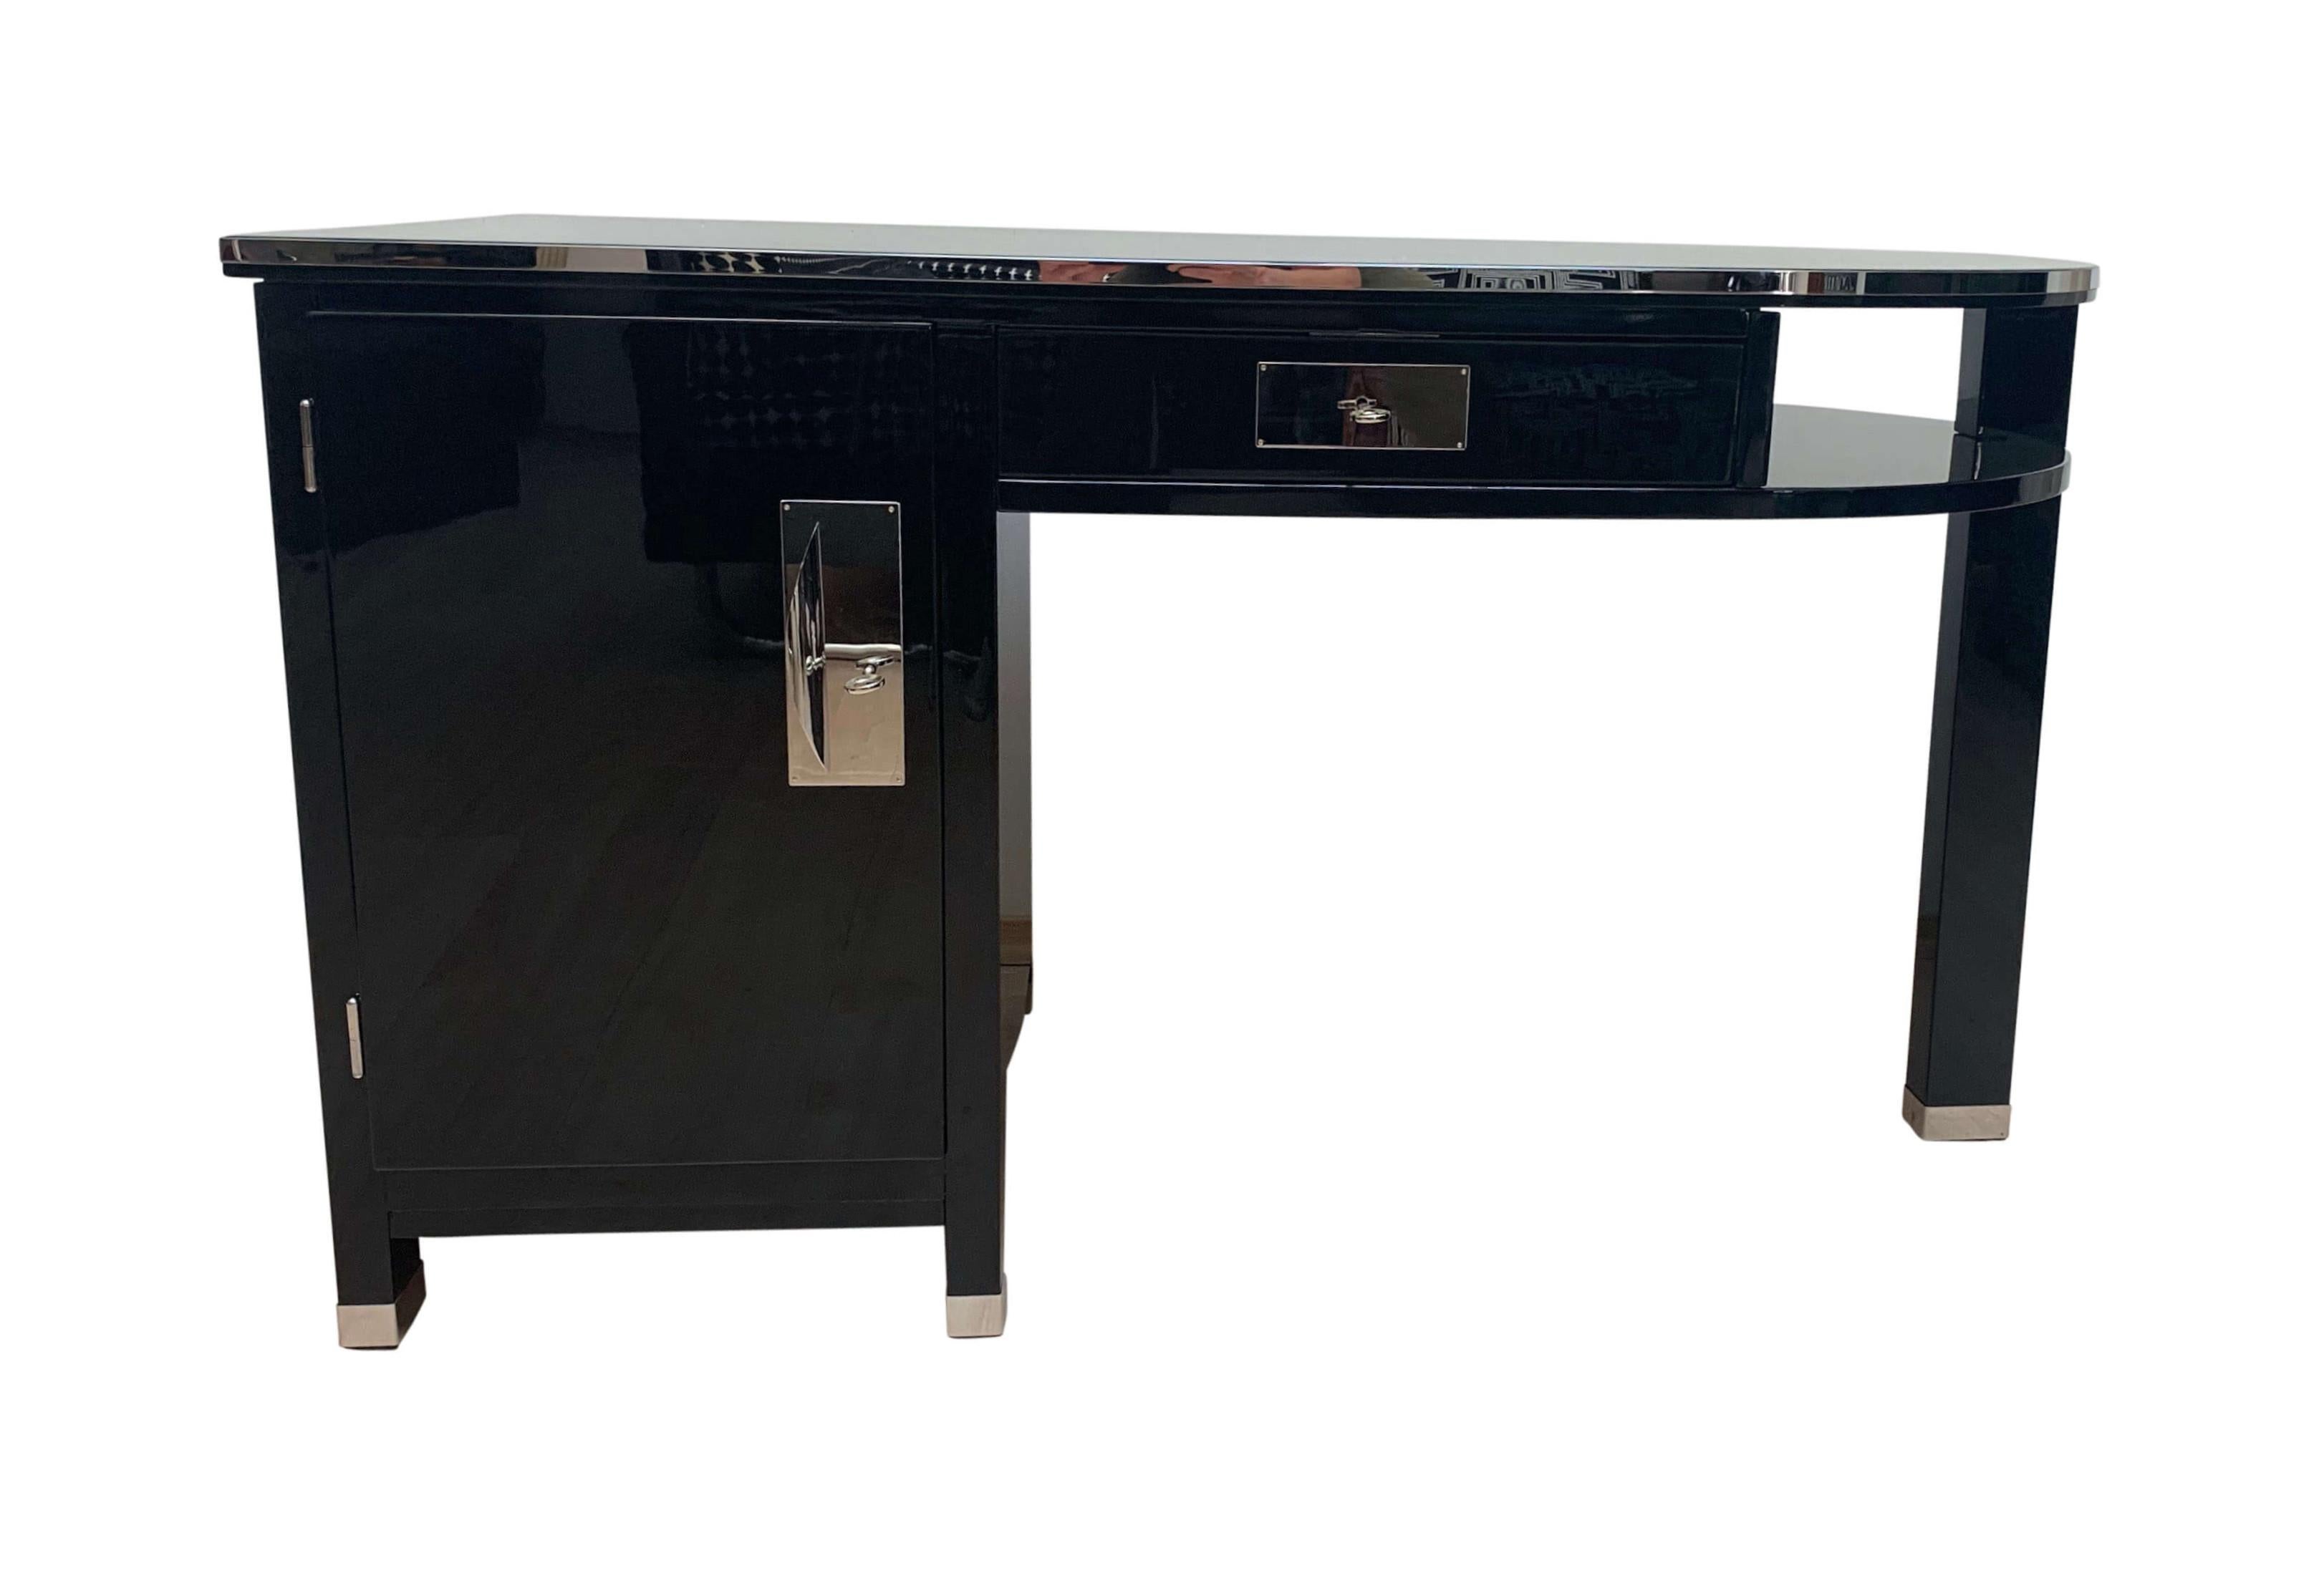 French Small Art Deco Desk with Column Leg, Black Lacquer and Metal, France, circa 1930